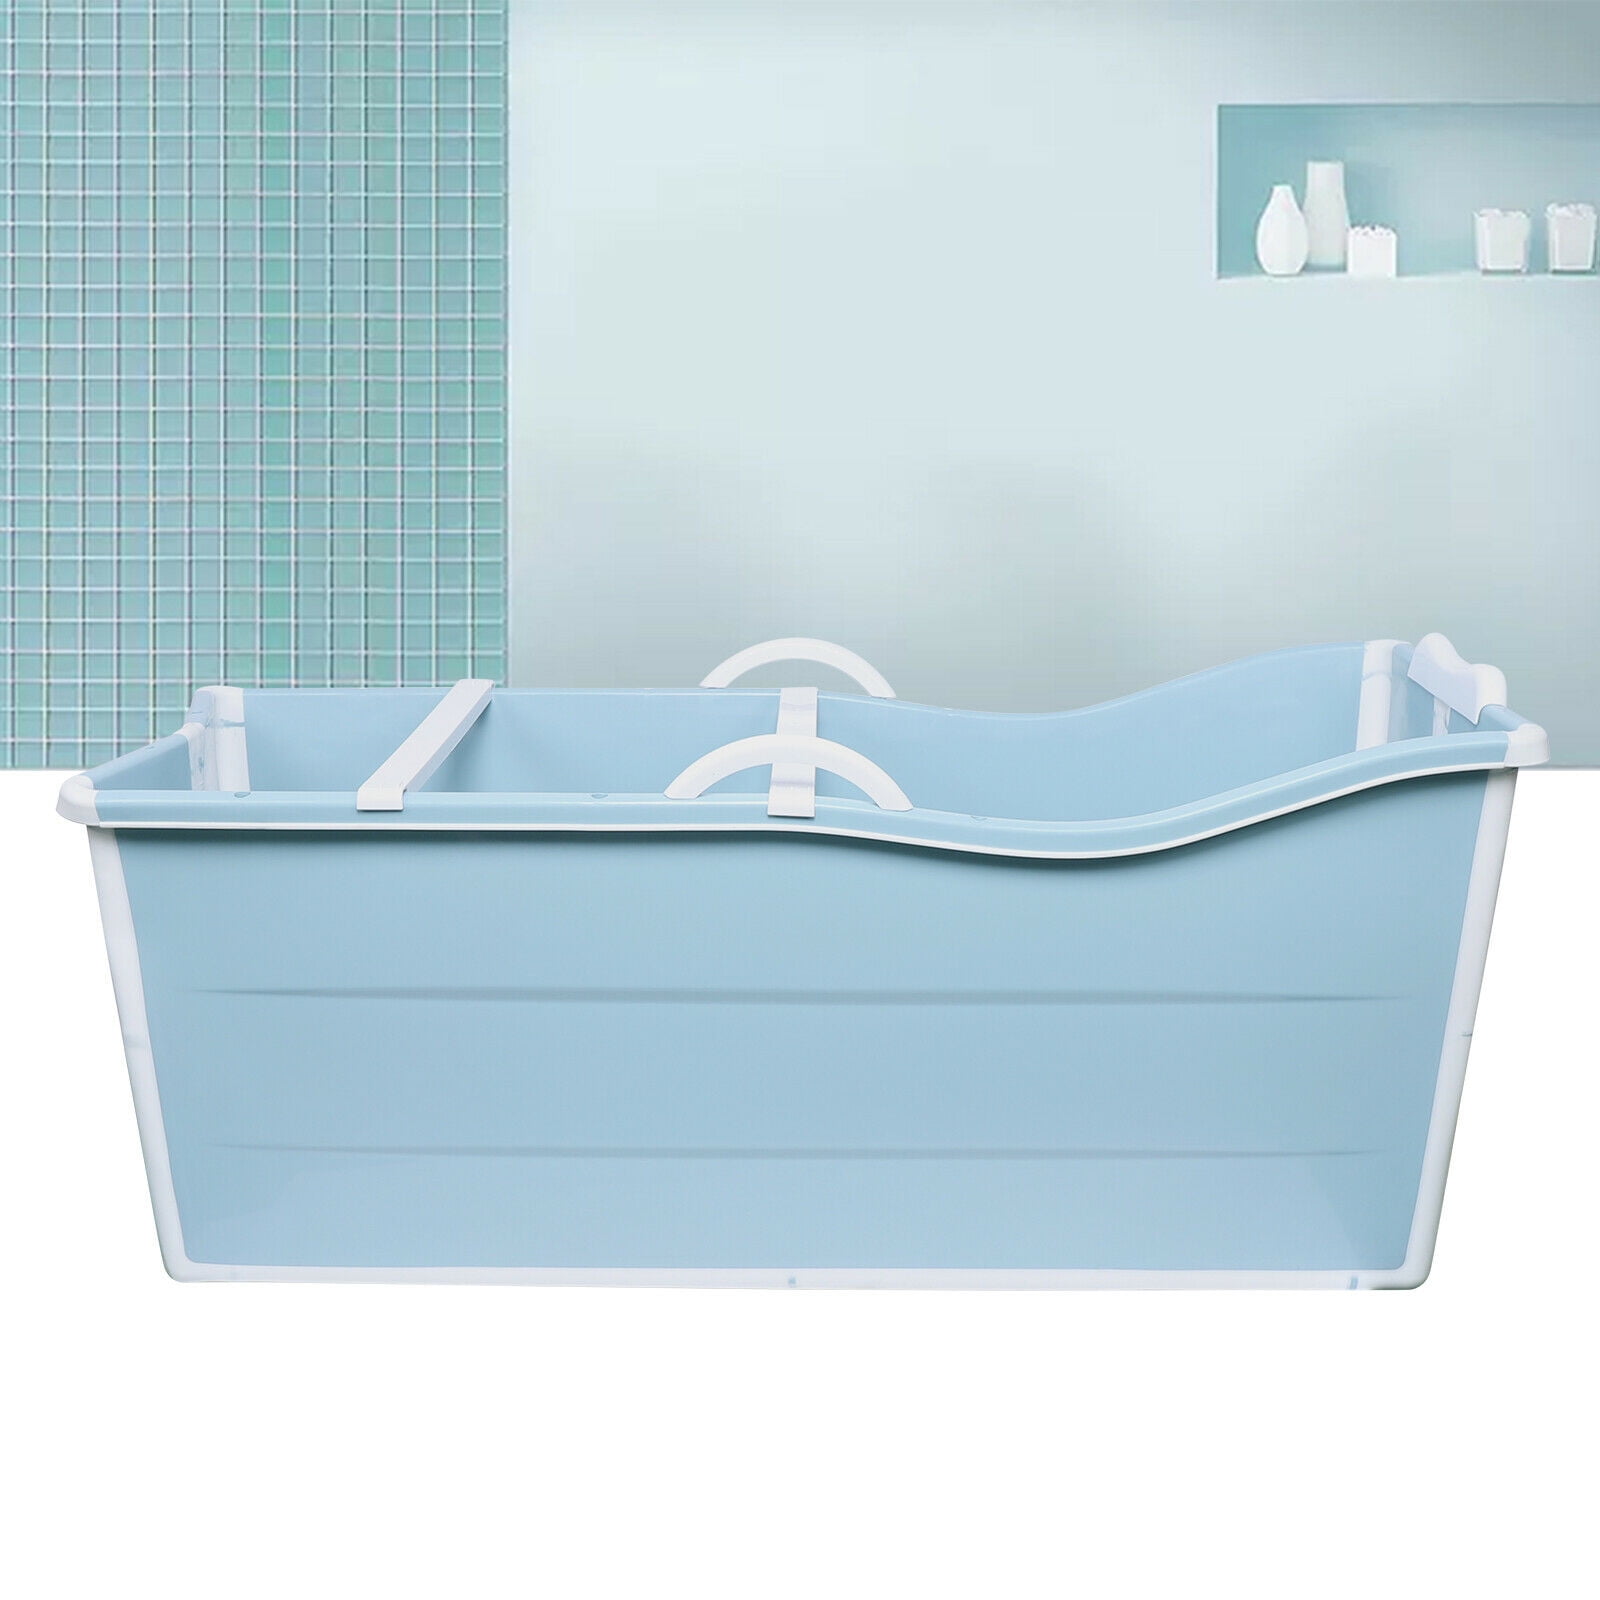 Oukaning Portable Folding Water Tub, How To Use A Spa Bathtub